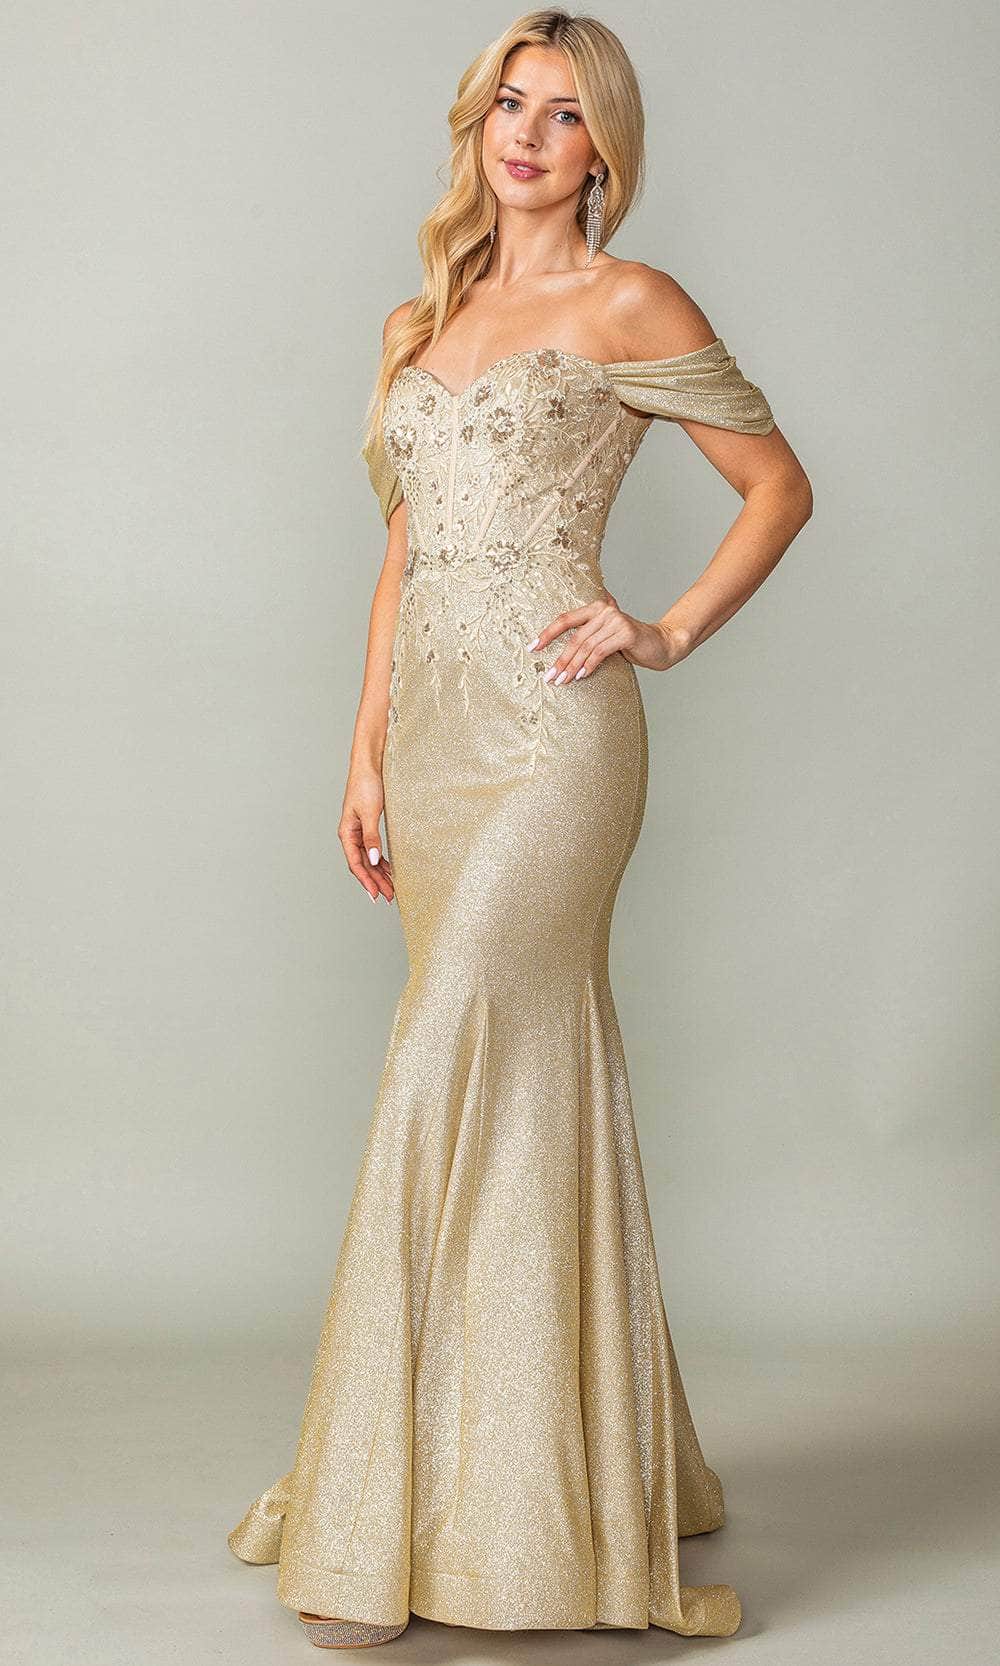 Image of Dancing Queen 4362 - Embroidered Off Shoulder Prom Dress